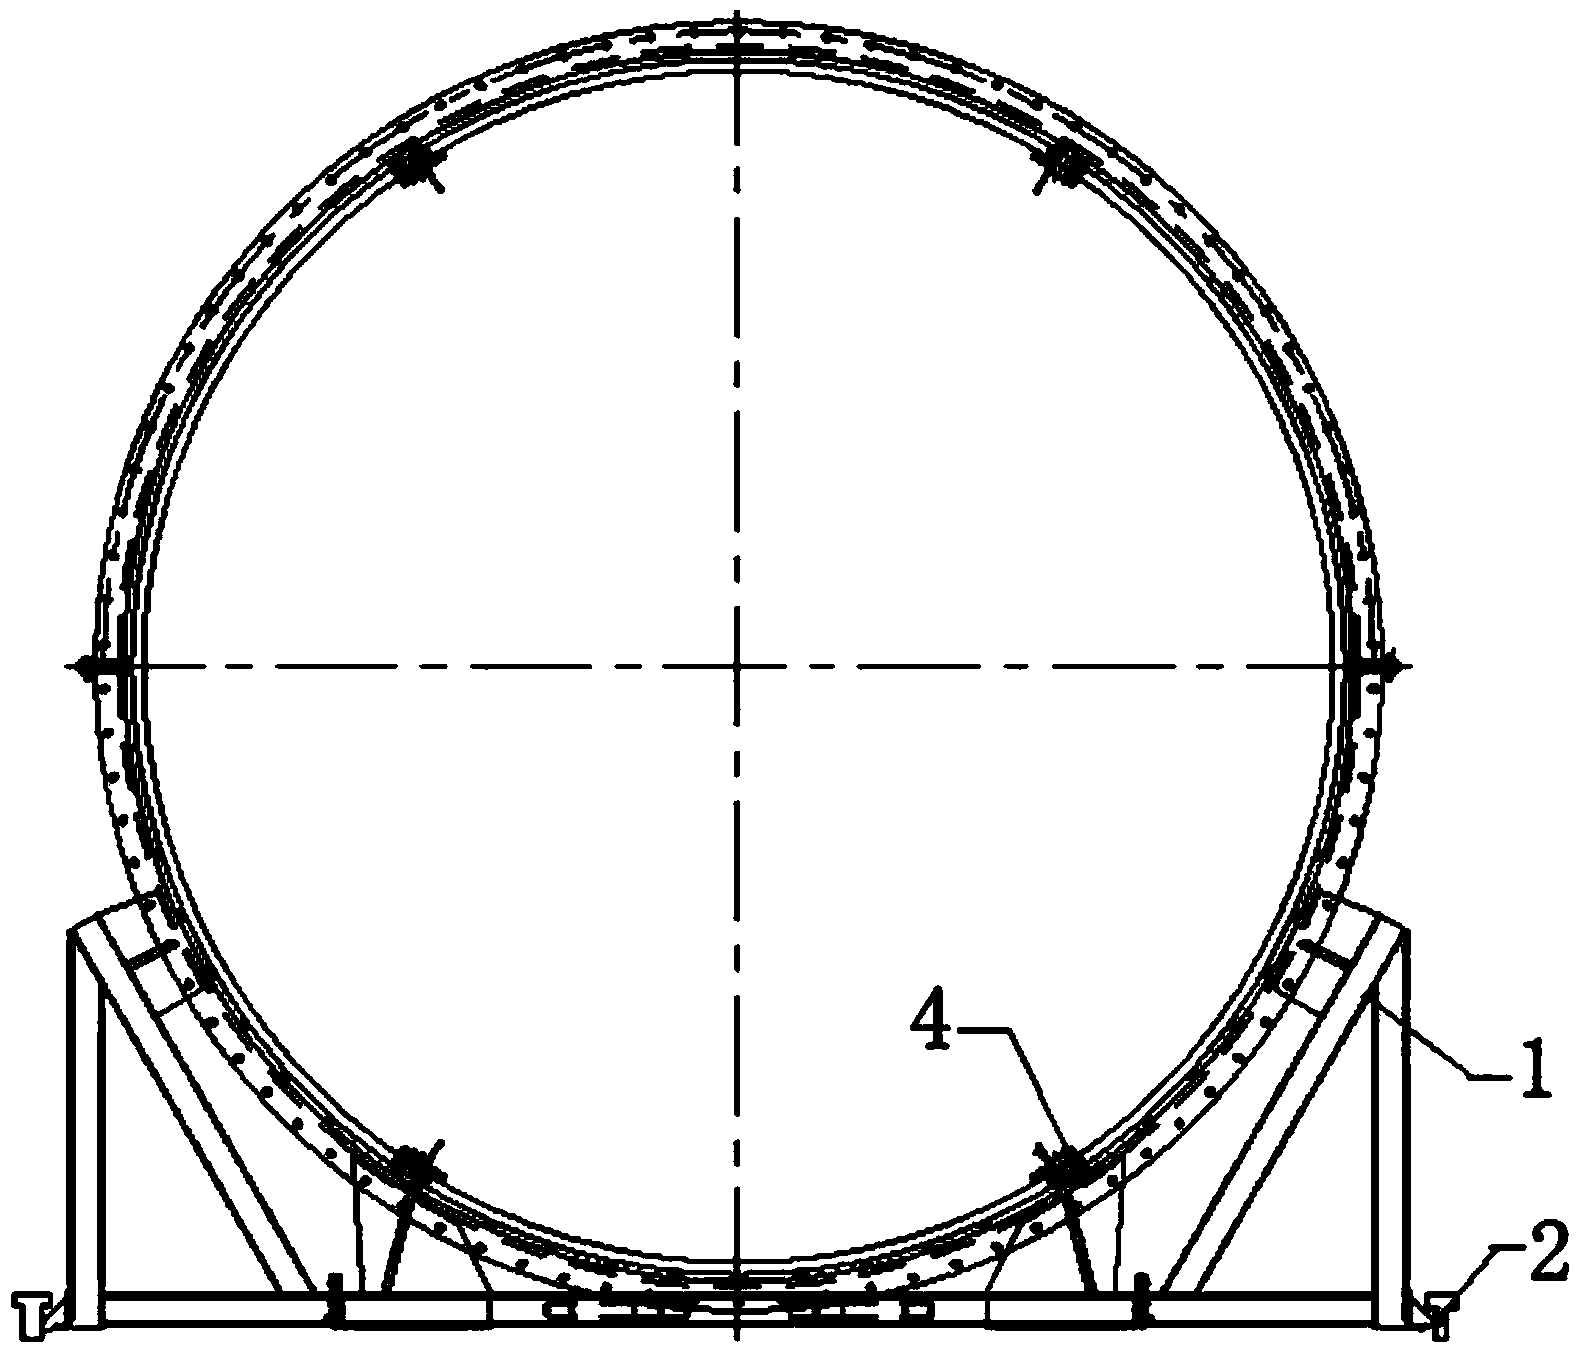 Shield machine starting device with adjustable seal